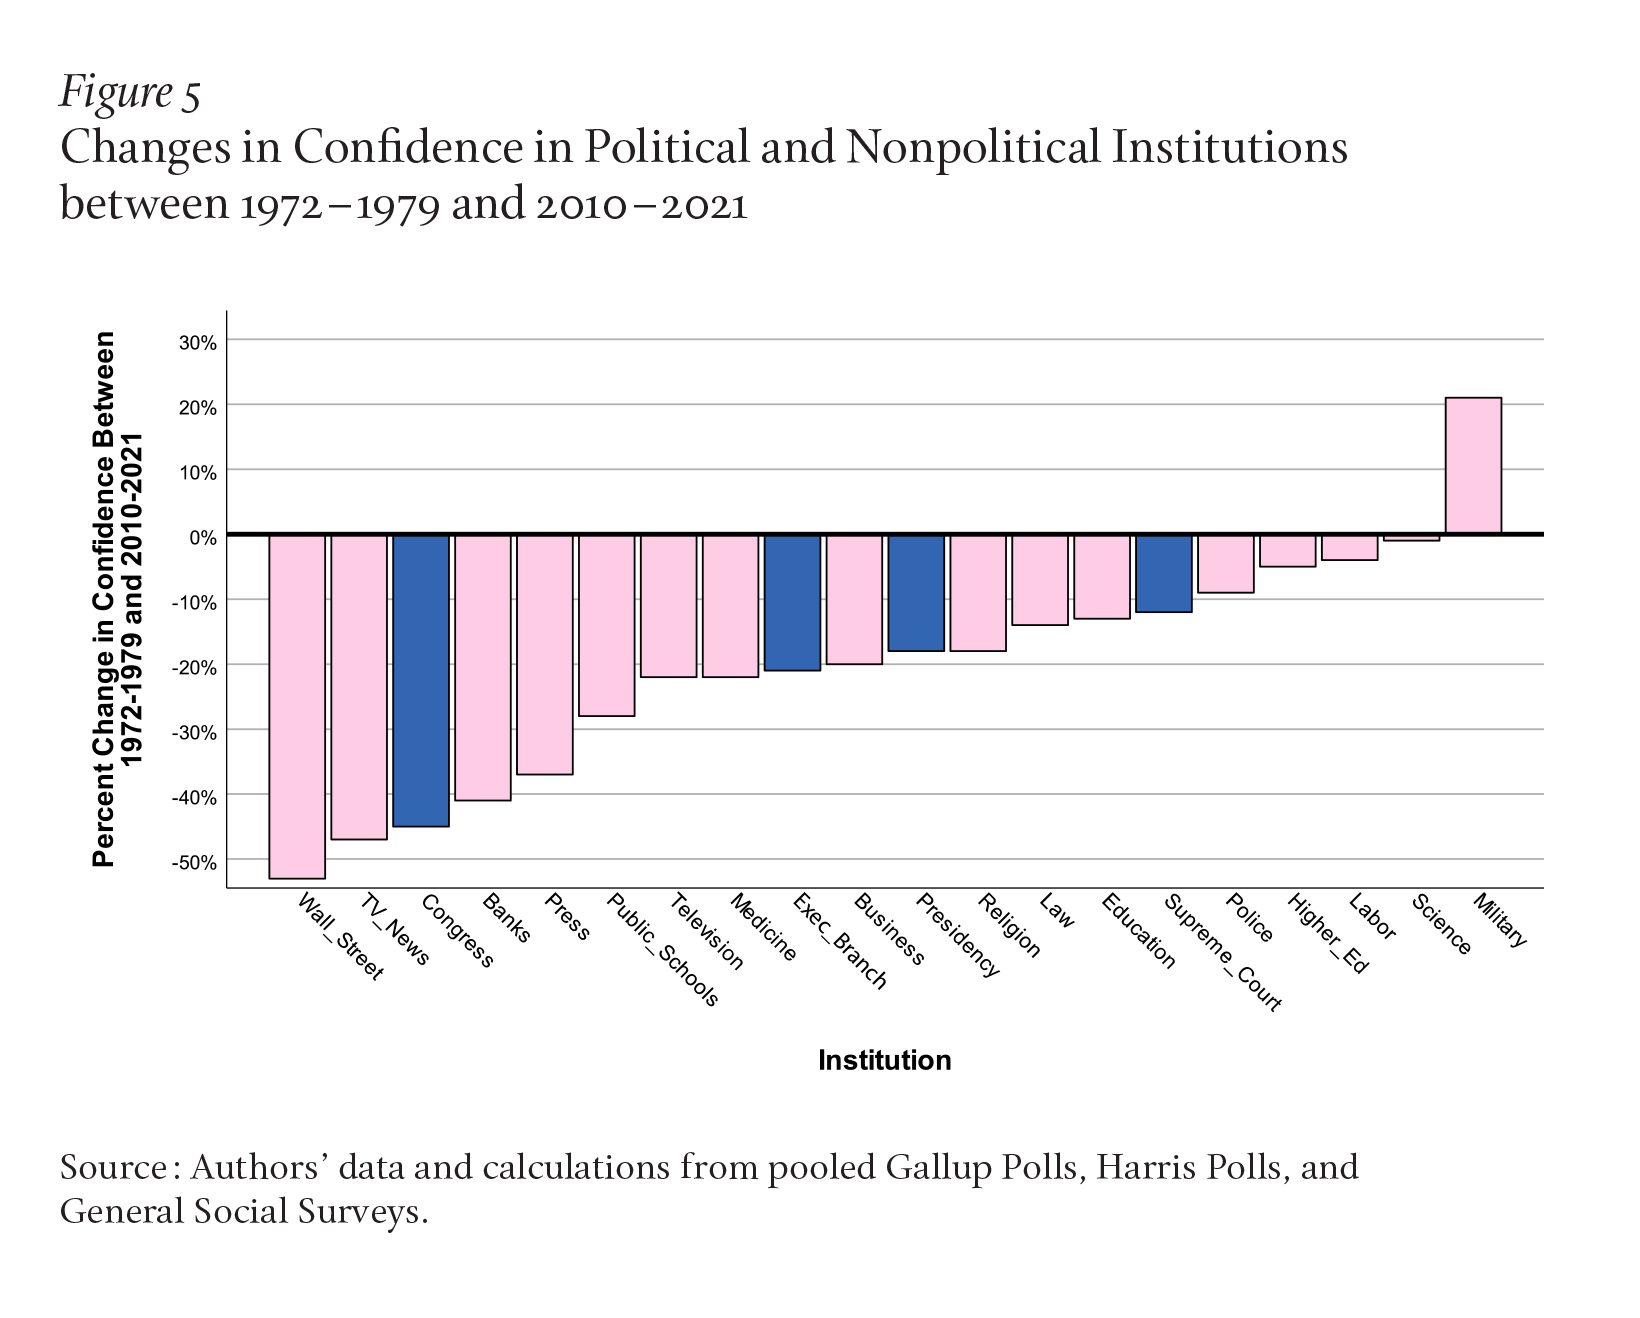 Figure 5 illustrates the changes in confidence in political and nonpolitical institutions. At the far end of loss of trust are Wall Street, TV news, Congress, banks, and the press. The smallest losses belong to police, higher ed, labor, and science, with just the military in the positive.